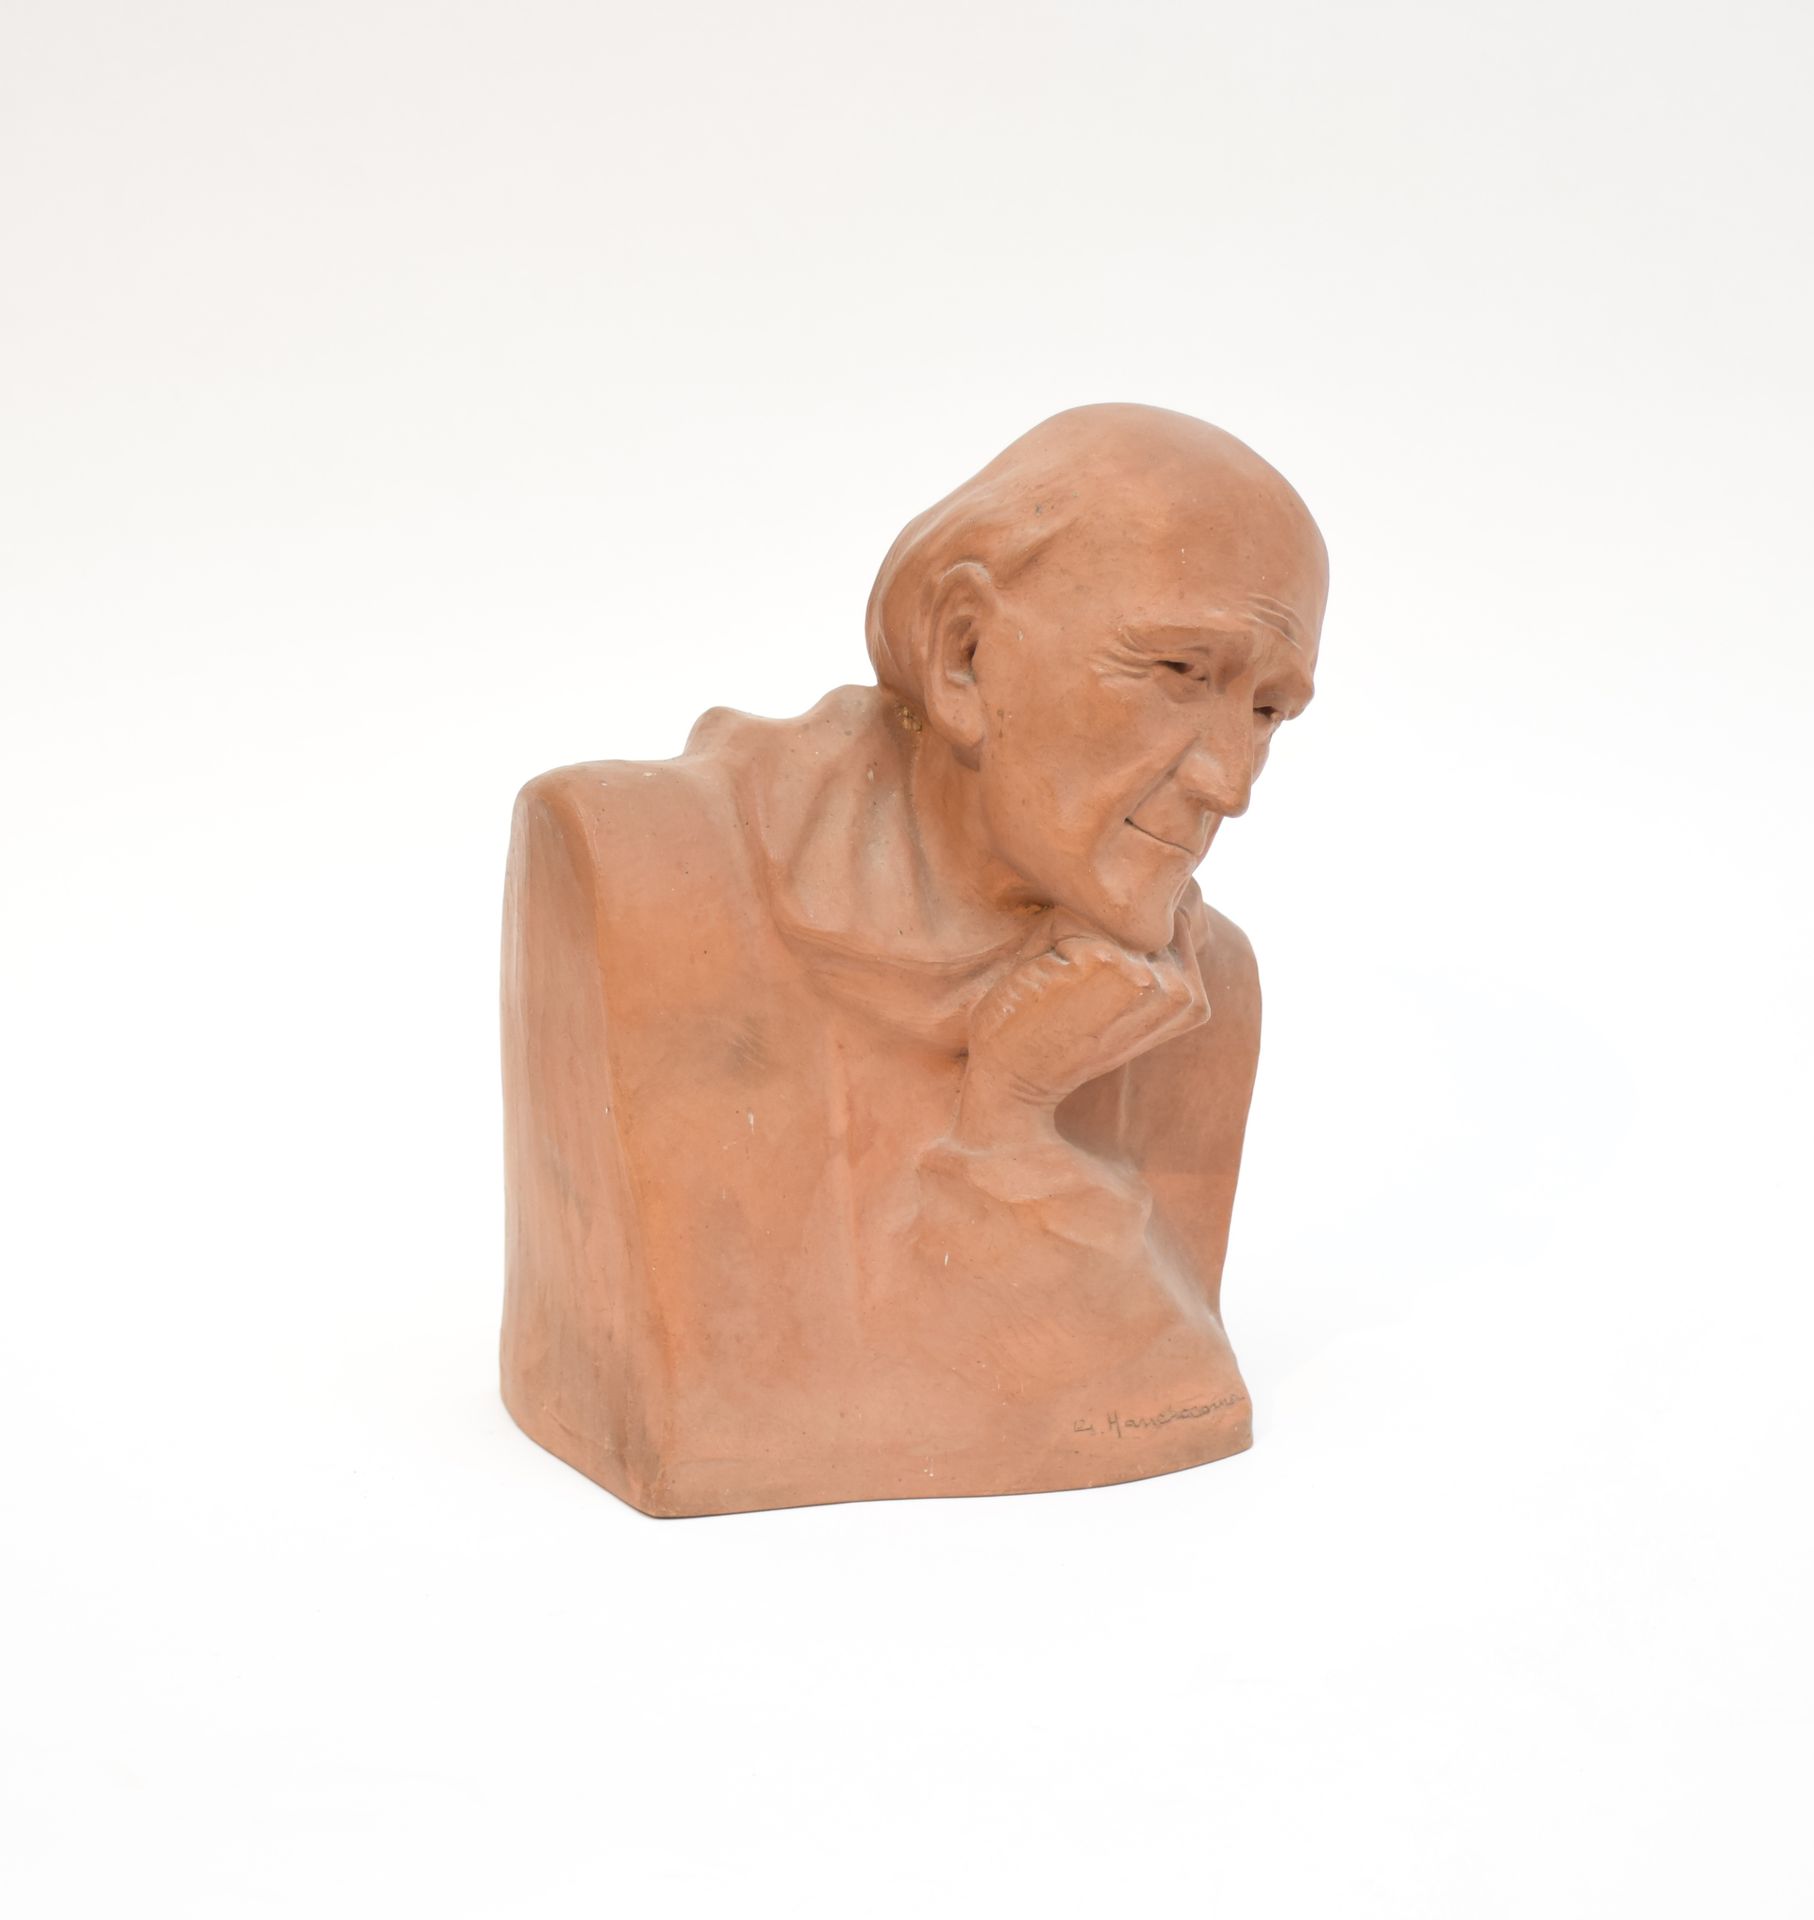 Null Gaston HAUCHECORNE (1880-1945)

Terracotta representing an old man. Signed &hellip;